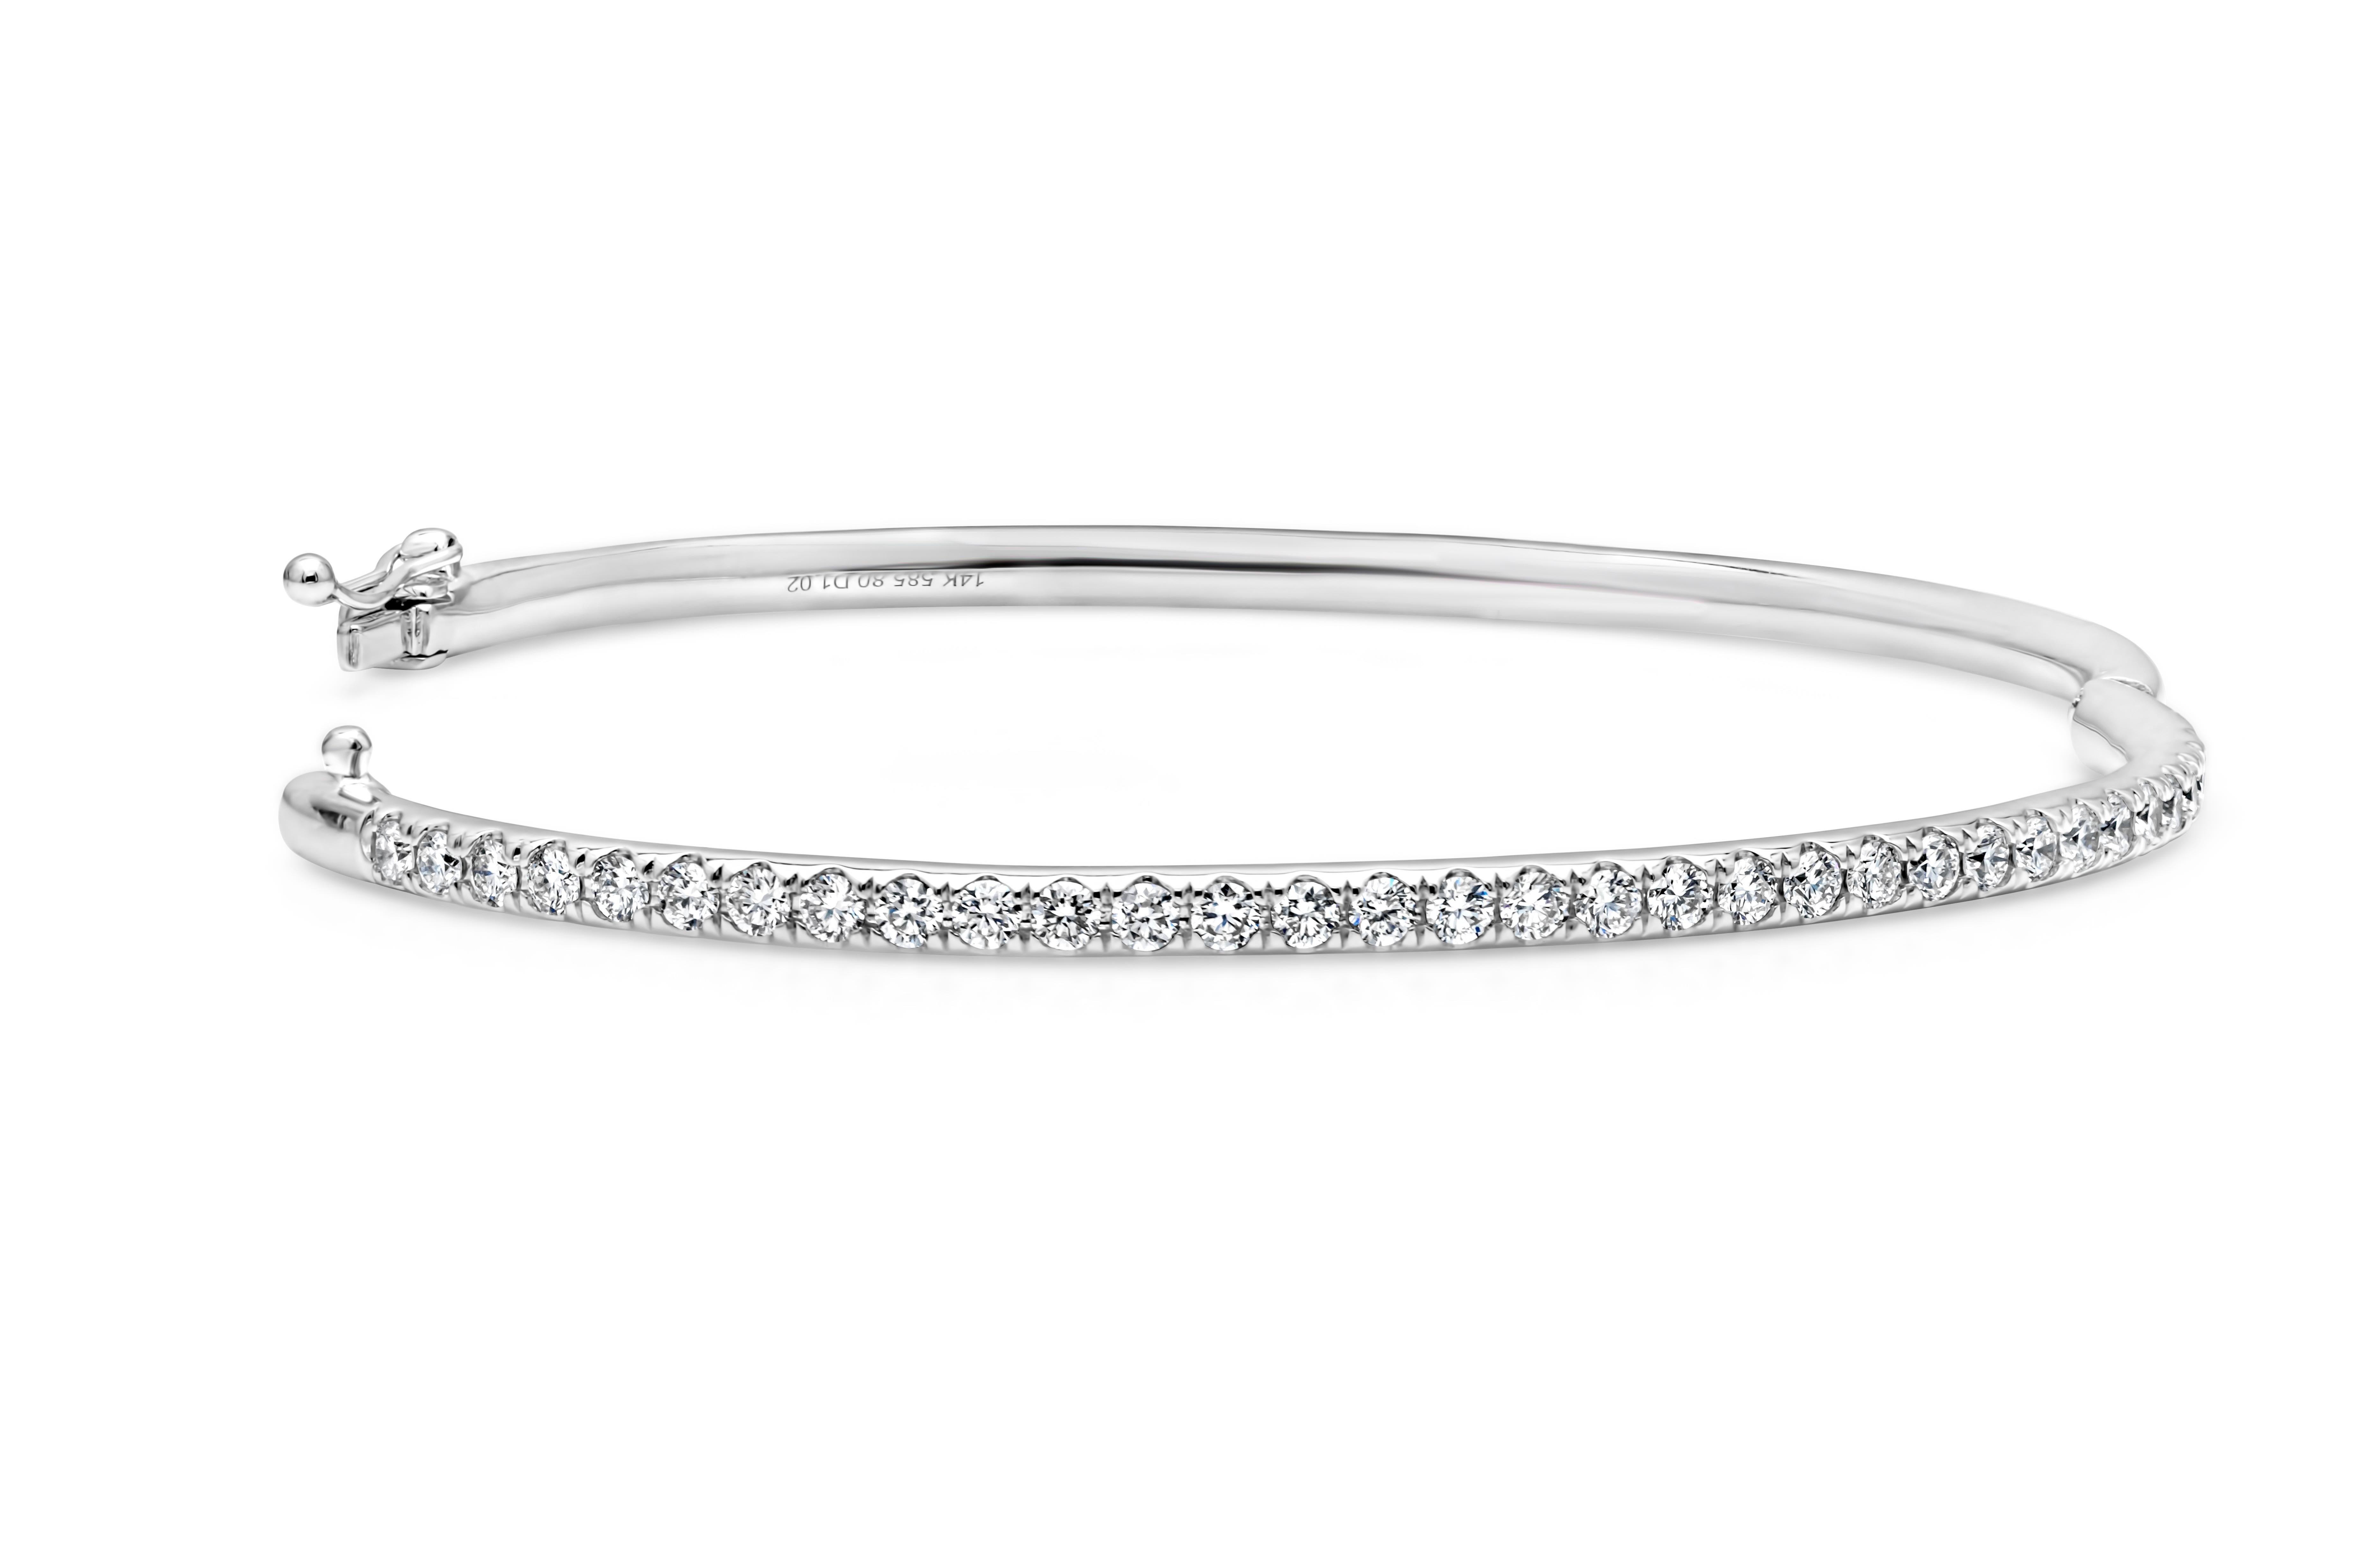 A simple and elegant small wrist bangle bracelet, featuring 32 round brilliant cut diamonds weighing 1.02 carats total with F color and VS clarity. Finely set on 14K white gold, with a clasp for secure wear. This bracelet is 6.88 inches in